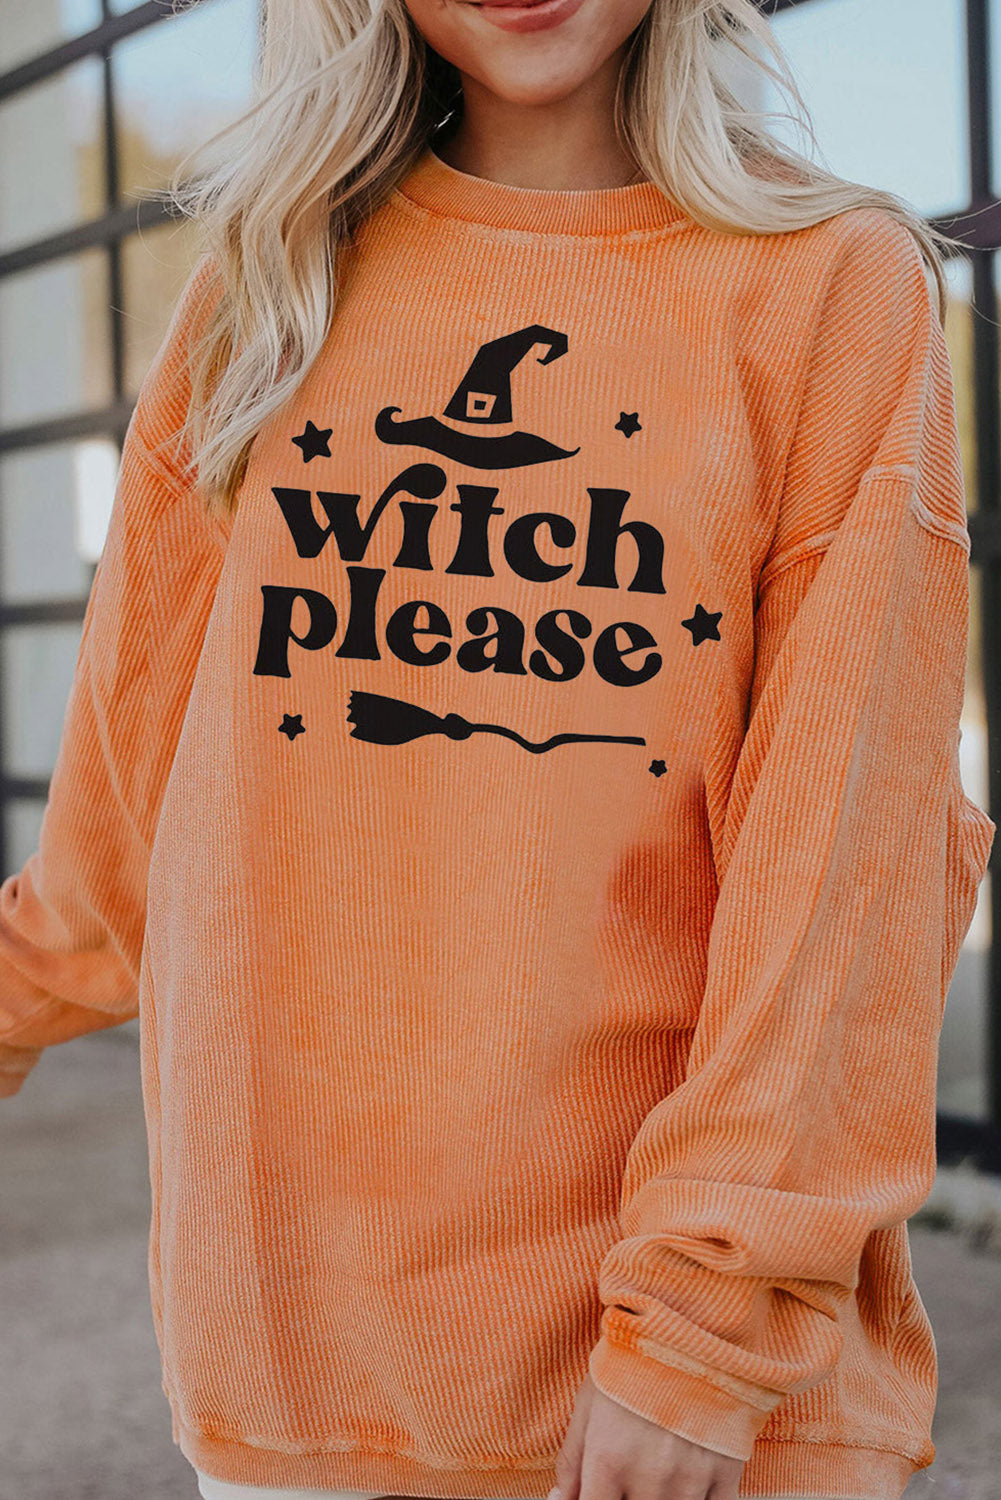 WITCH PLEASE Graphic Dropped Shoulder Sweatshirt Sherbet S CLOTHING, SHOES & ACCESSORIES by Trendsi | BlingxAddict